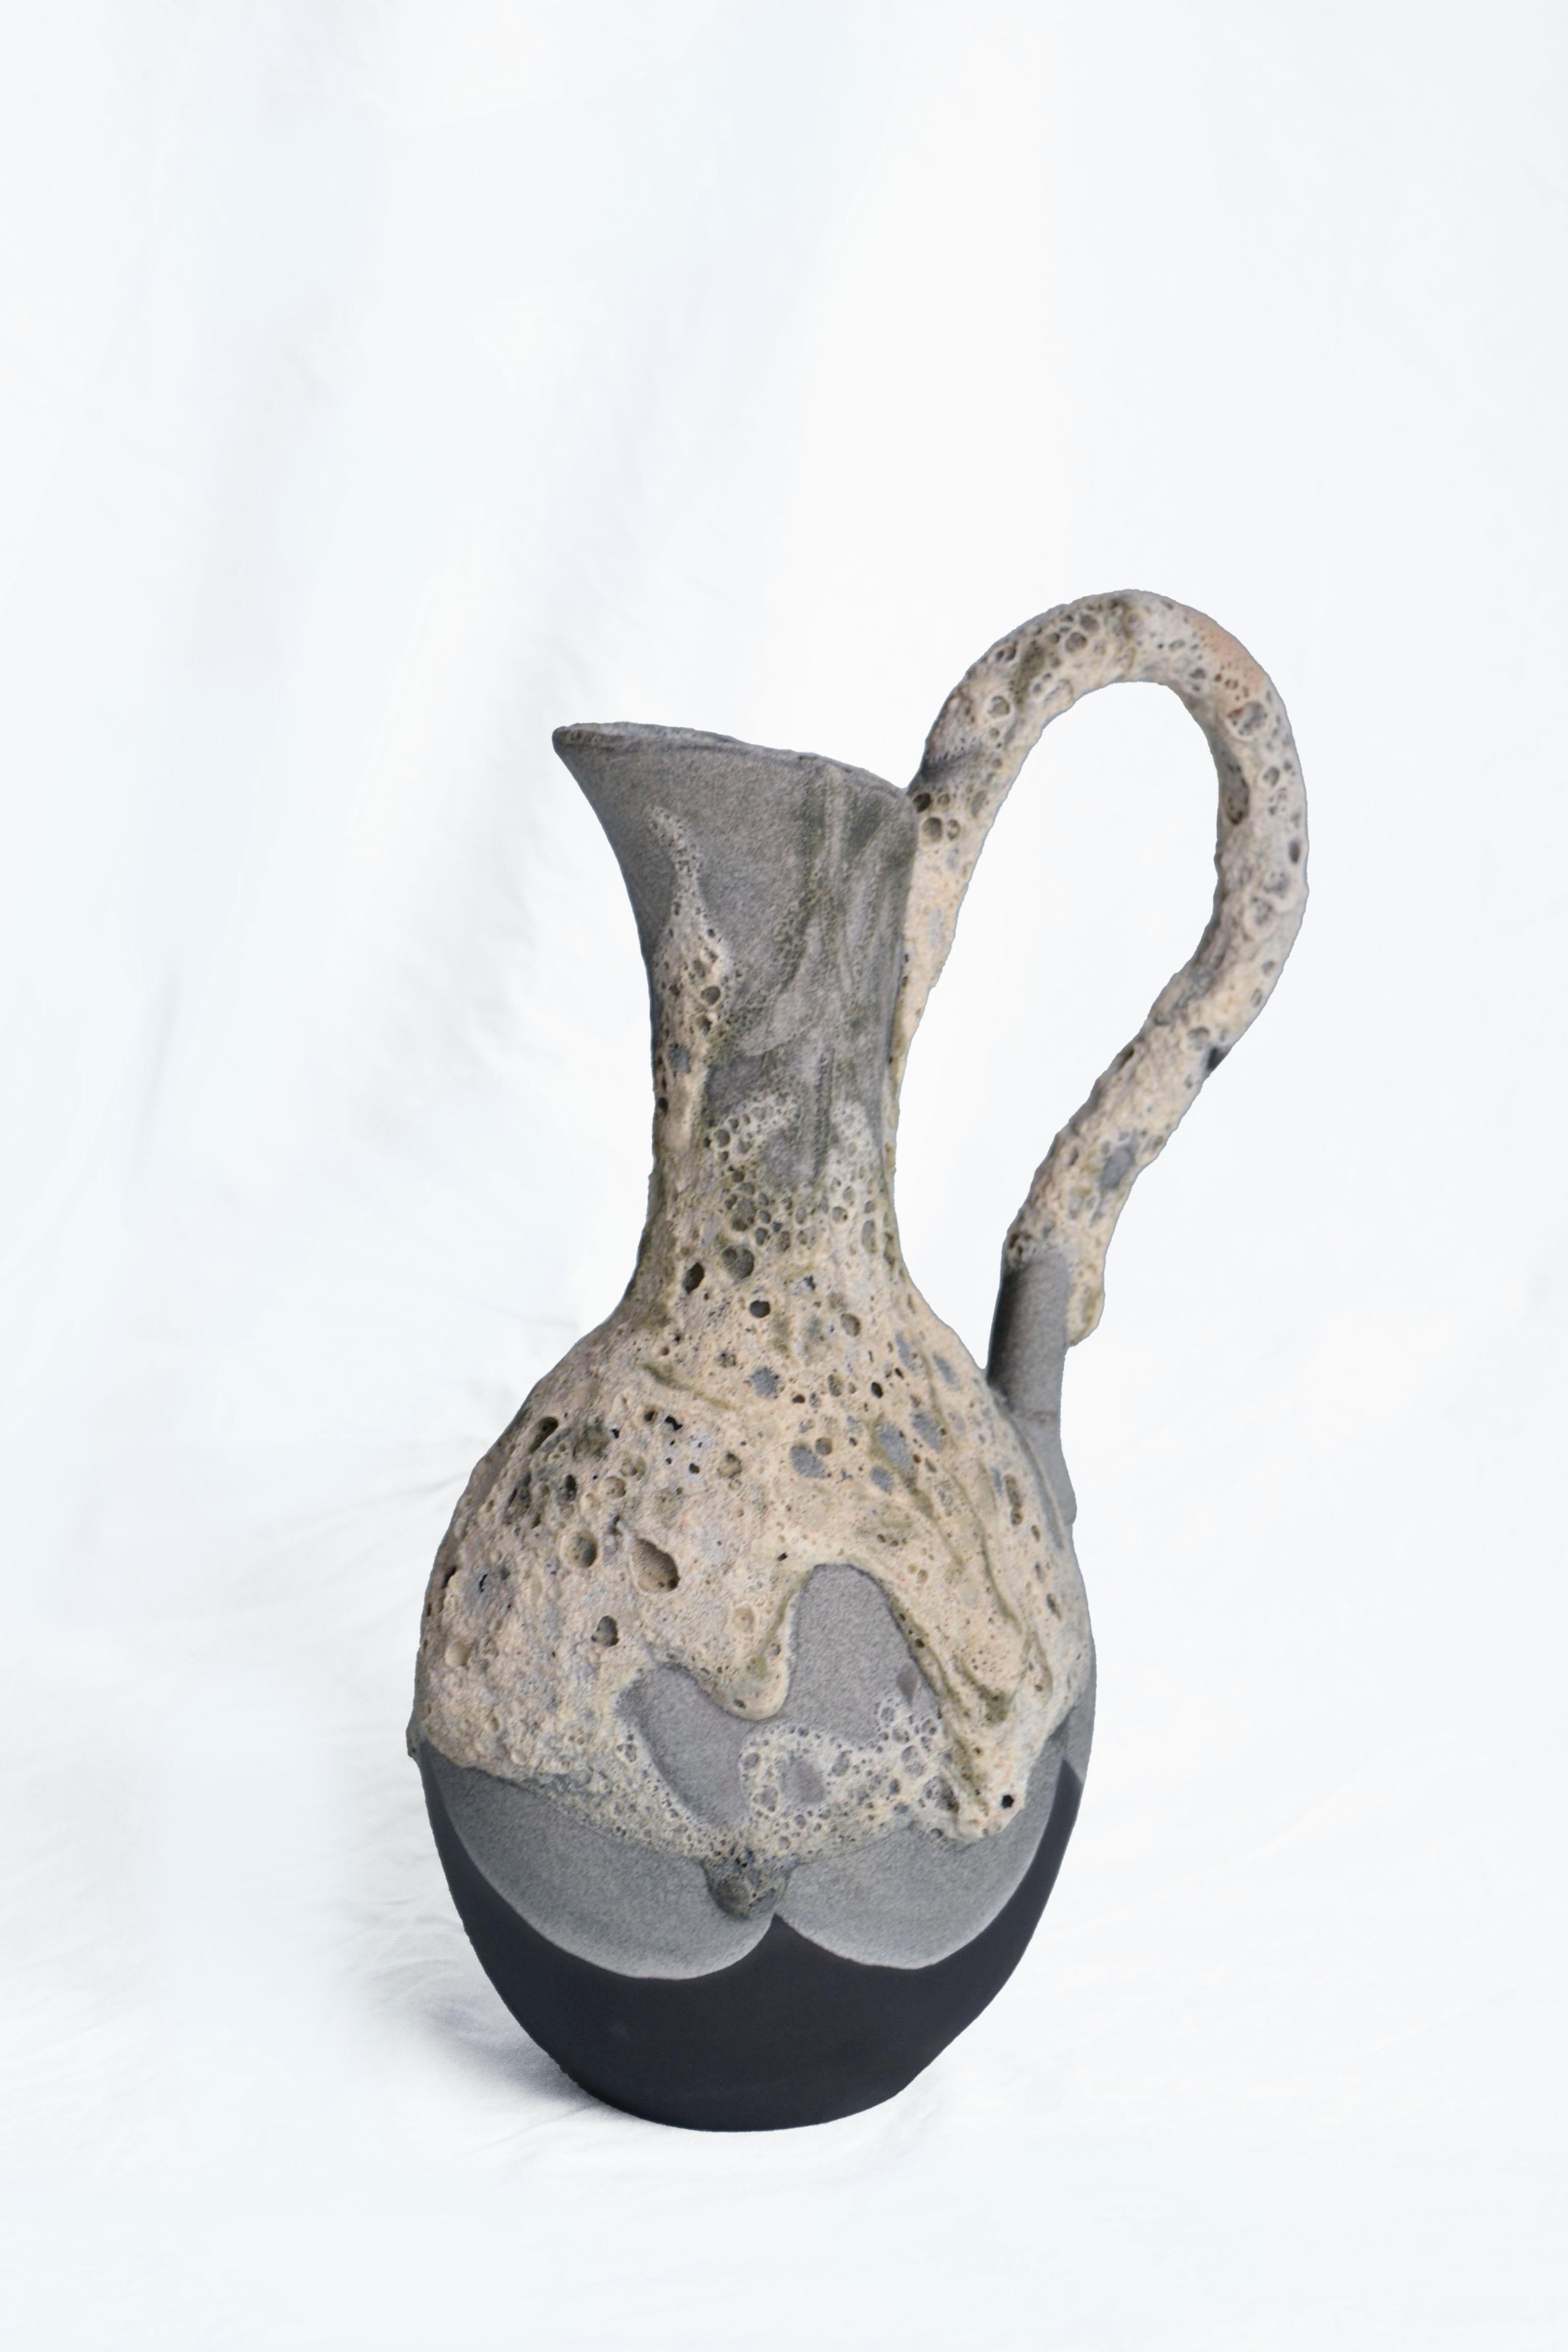 Carafe 2 vase by Anna Karountzou
Dimensions: W 21 x D 14 x H 34 cm
Materials: black stoneware clay, clear glaze inside, handmade crater glaze outside, fired at 1220

Born and based in Athens, Greece, with a background in conservation of works of